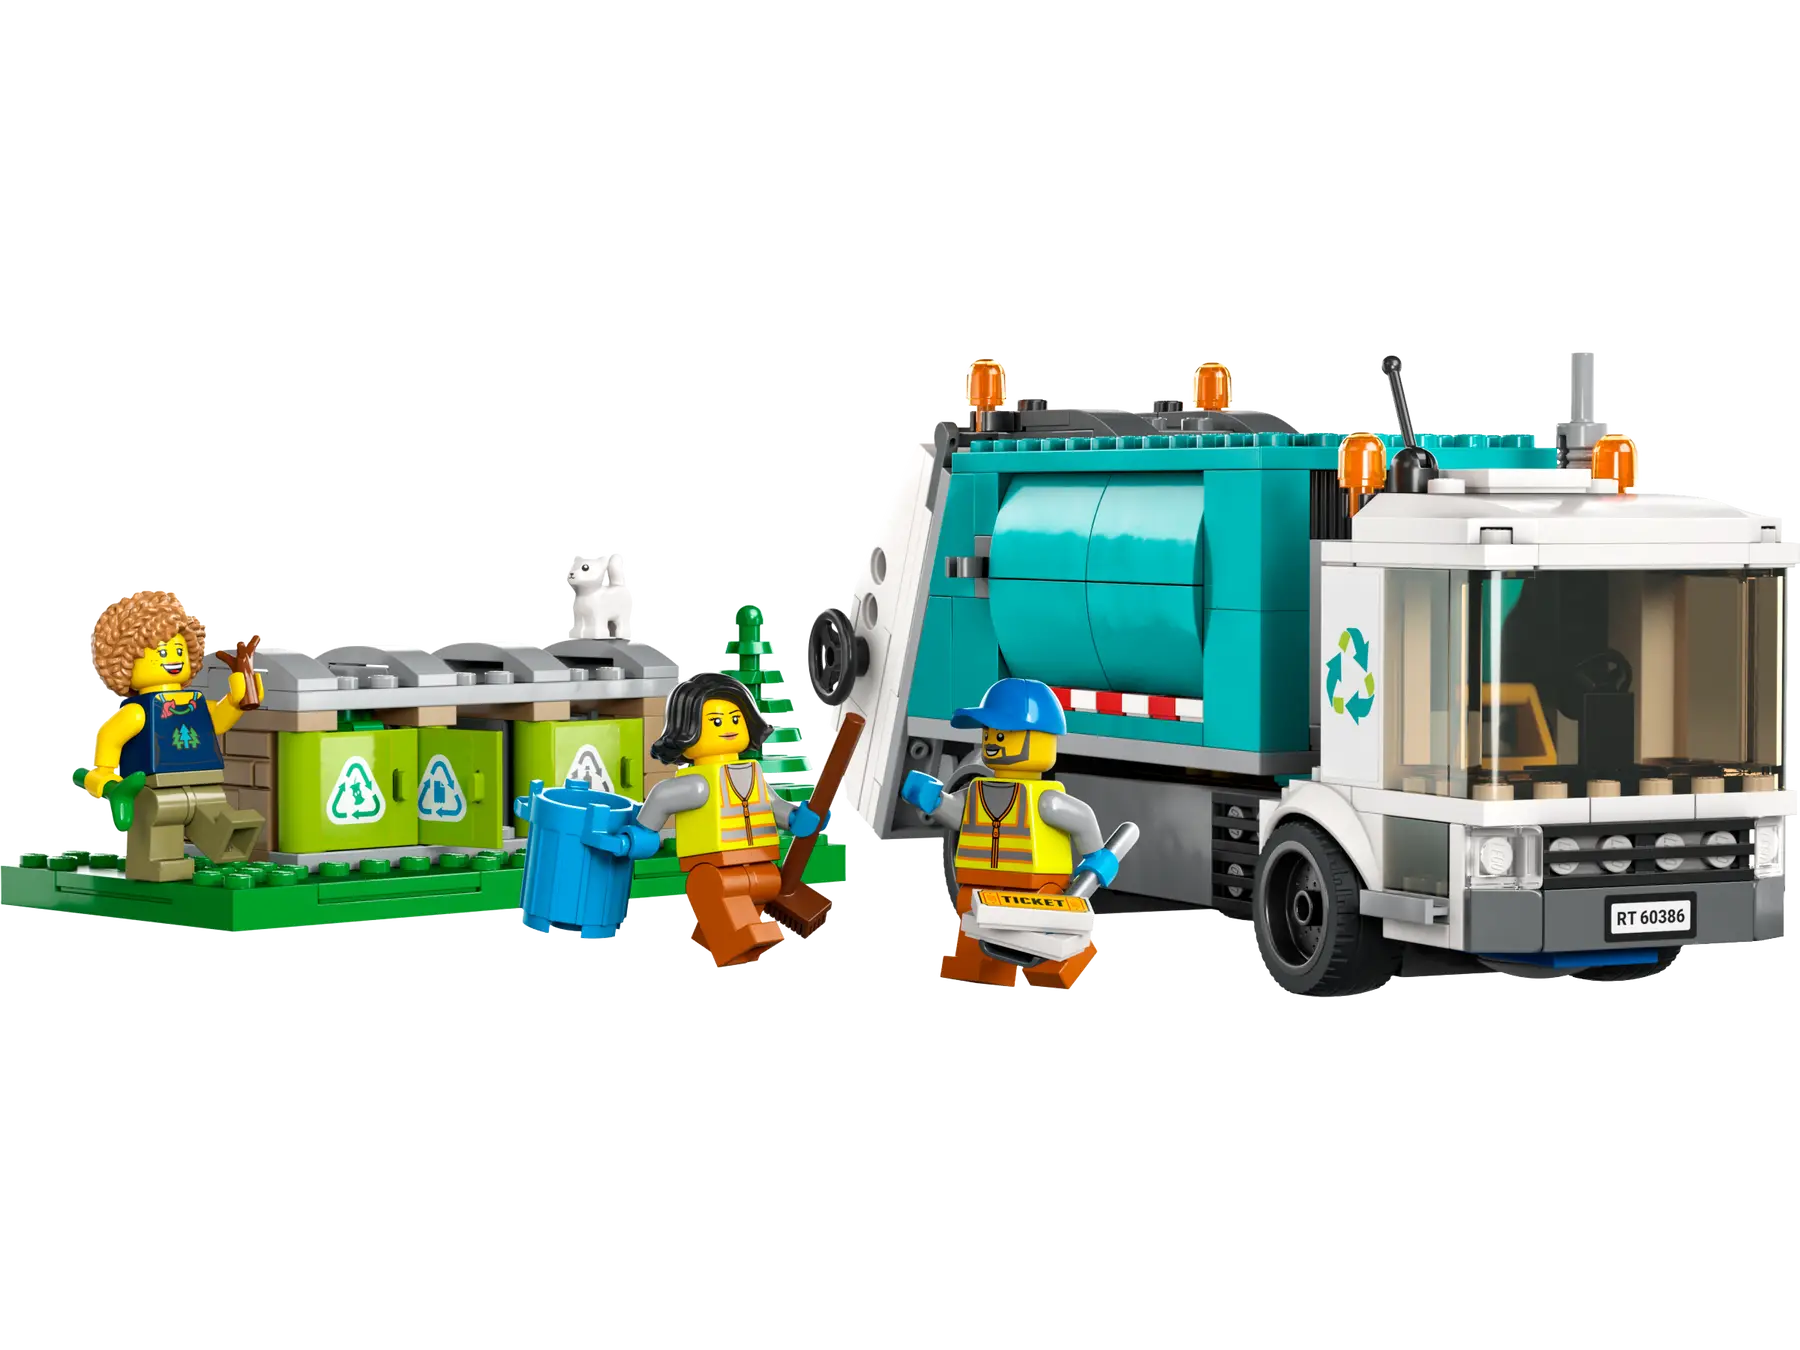 Lego City - Recycling Truck